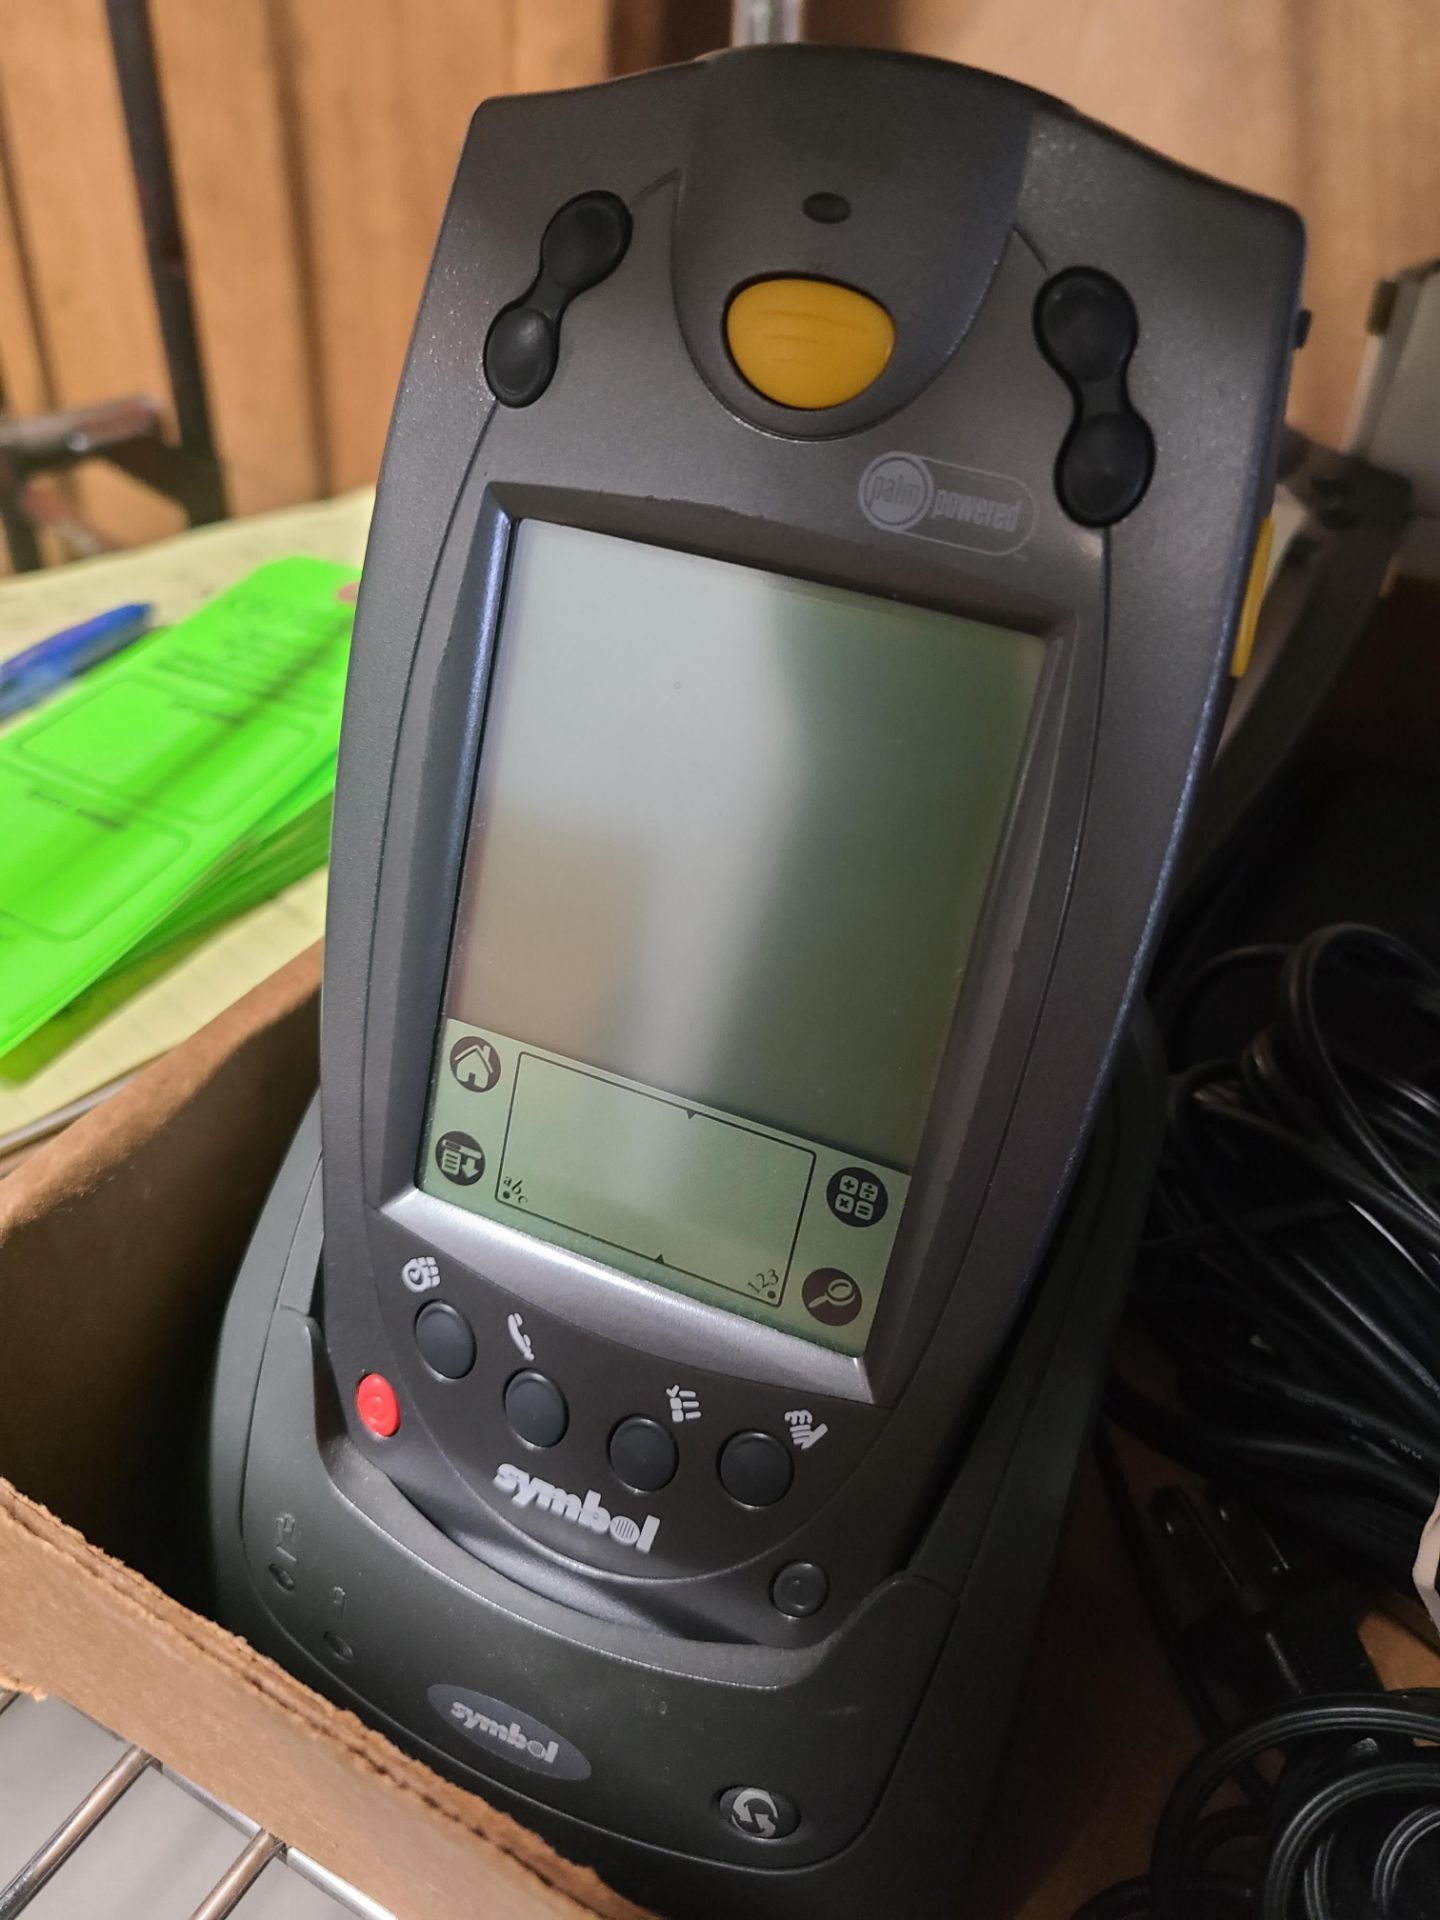 (3) SYMBOL PALM POWERED BAR CODE SCANNER WITH CHARGING DOCK - Image 2 of 5